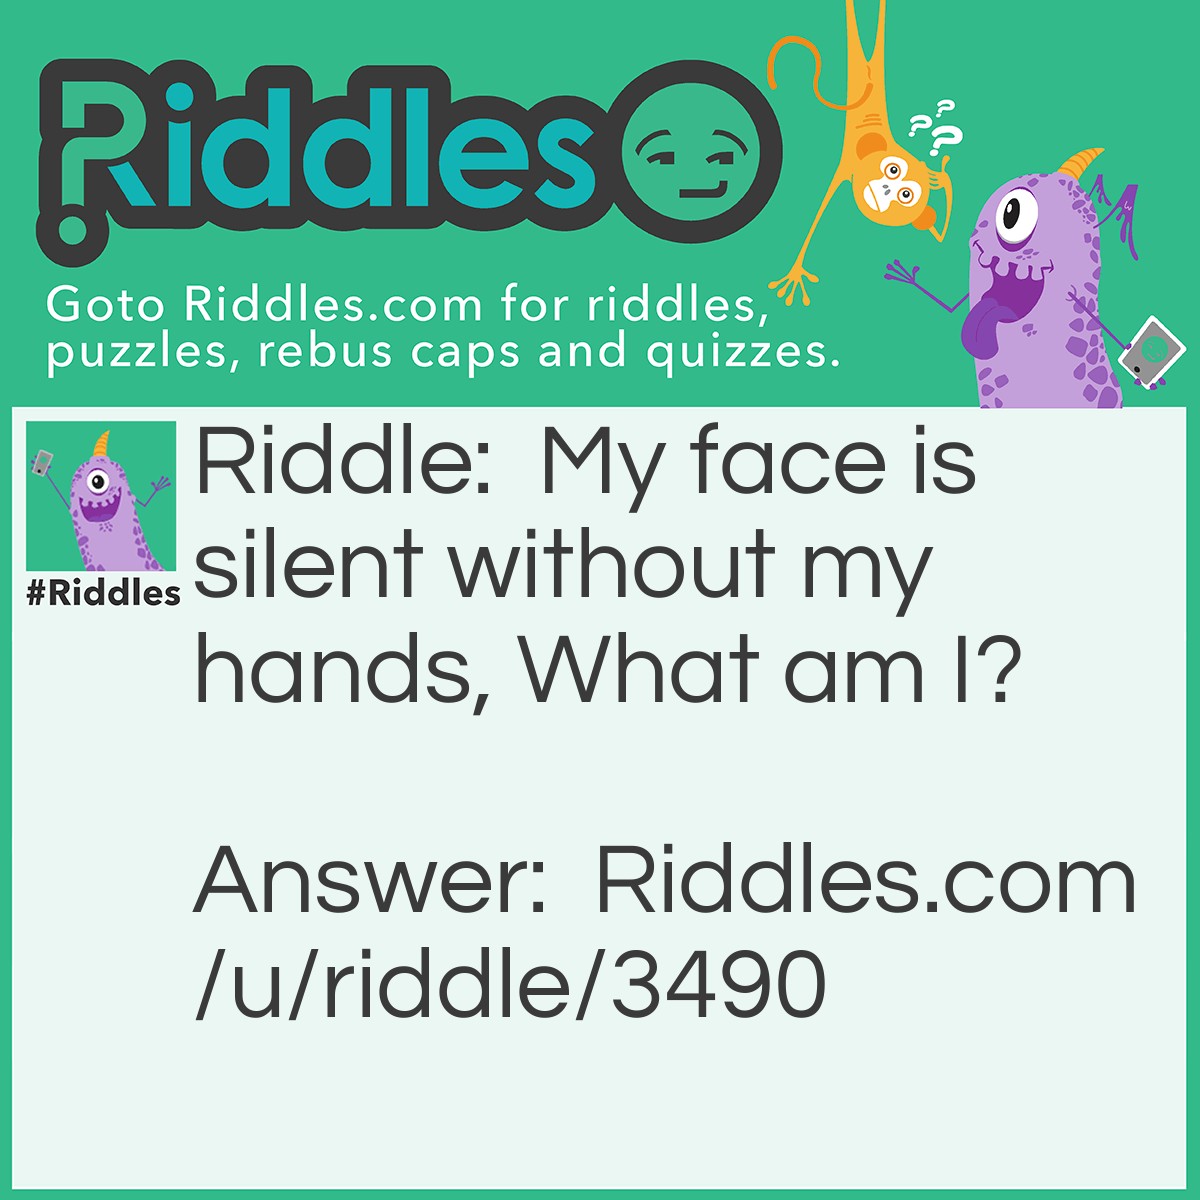 Riddle: My face is silent without my hands. What am I? Answer: A clock.